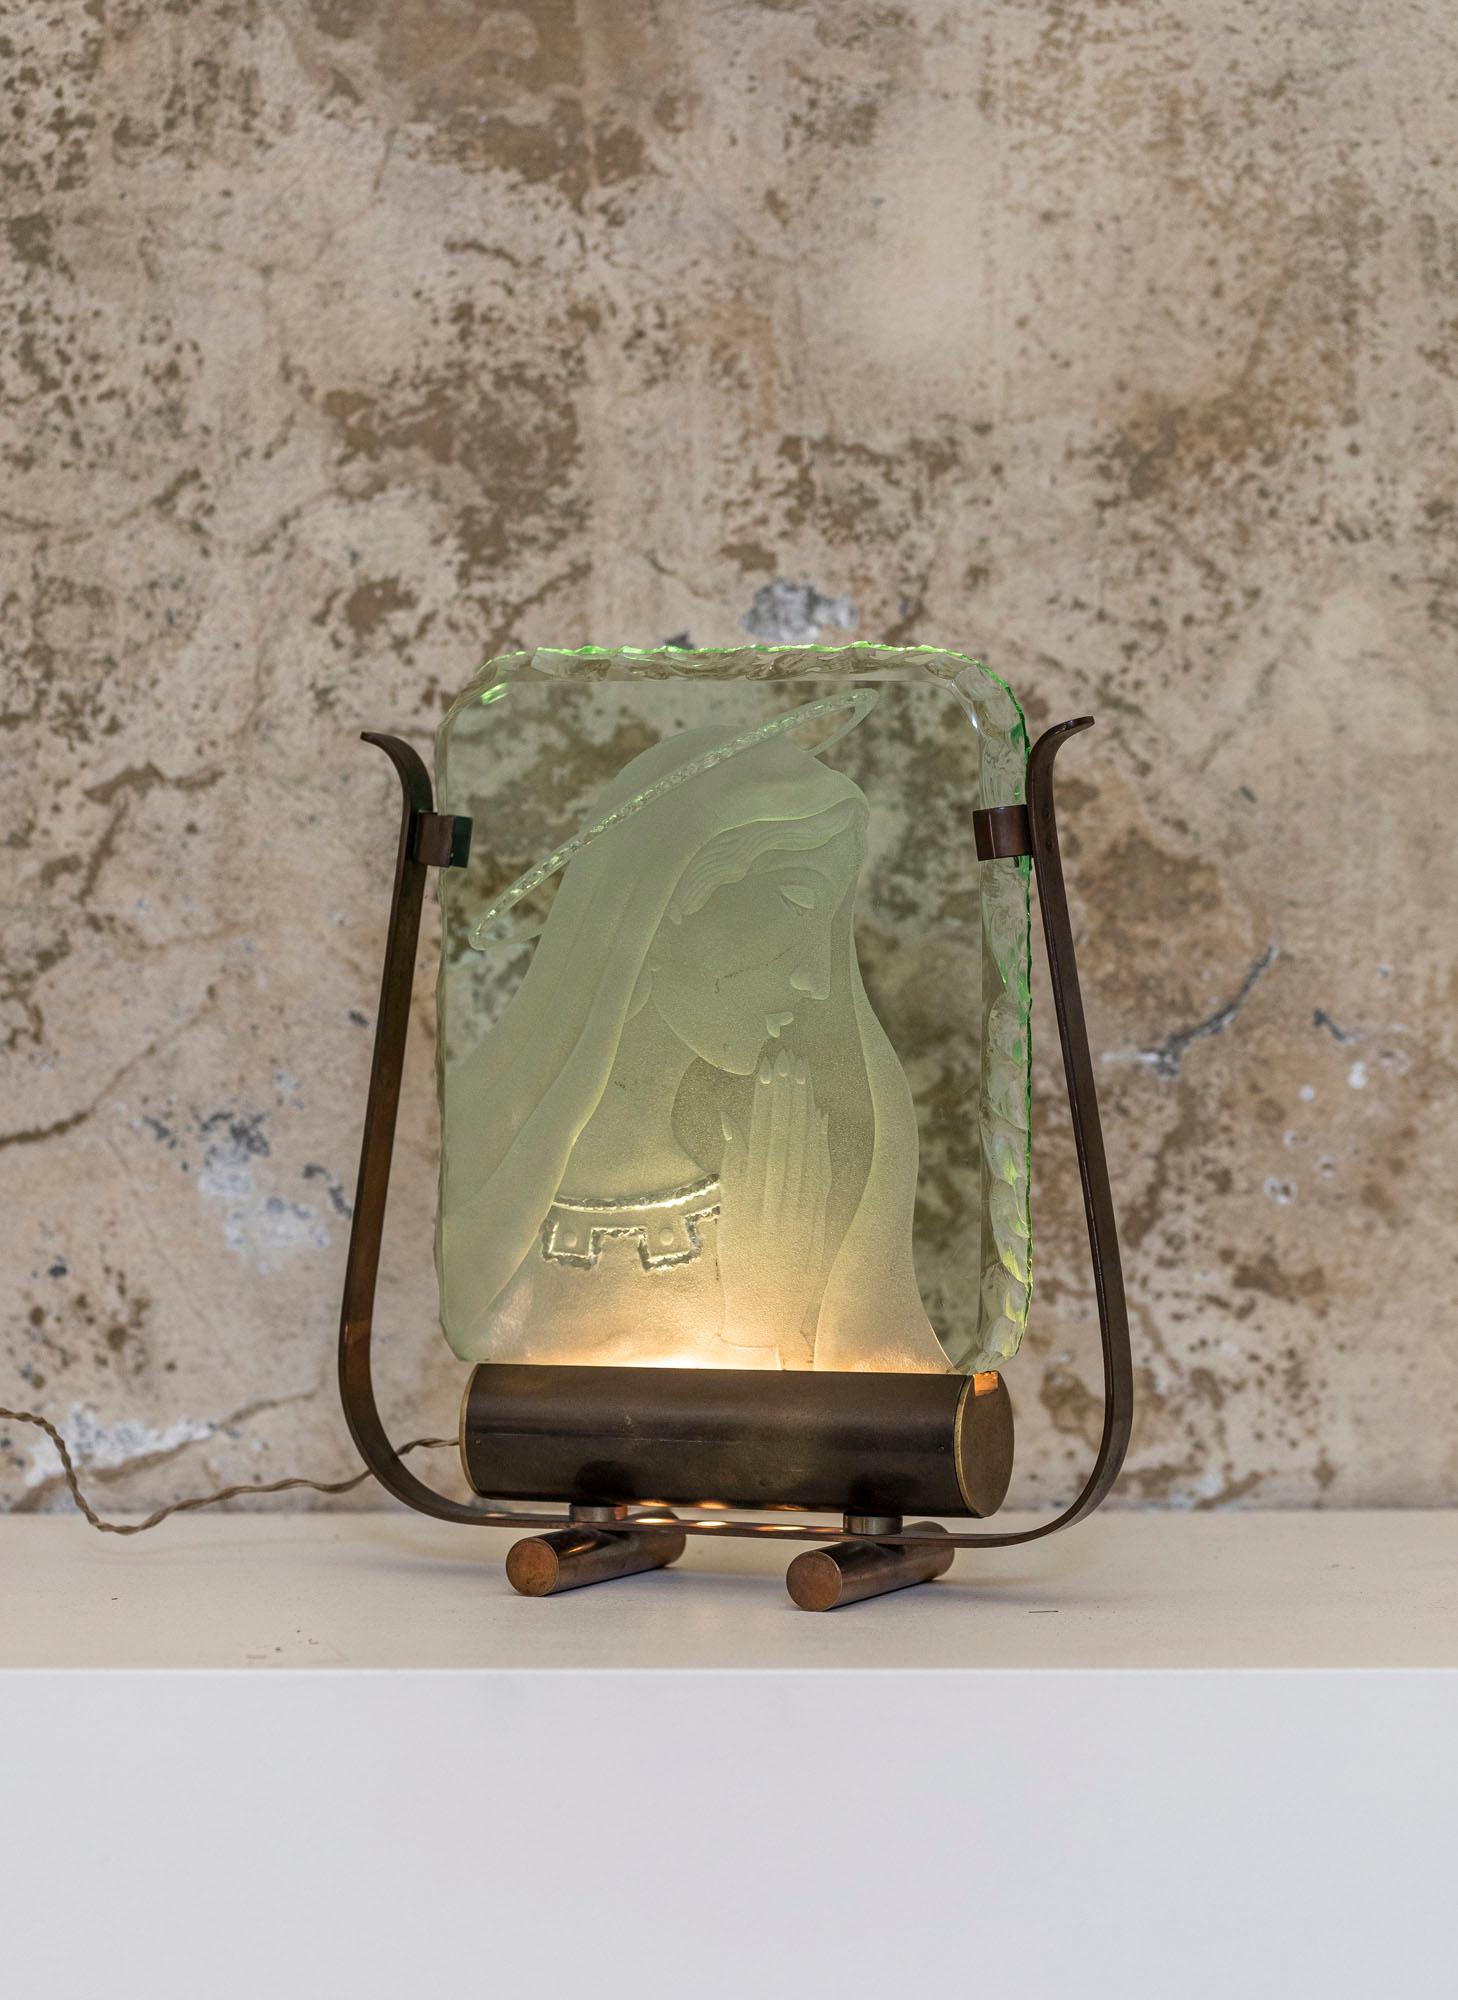 Table lamp with religious female figure made by Pietro Chiesa for Fontana Arte, Italy 1940 ca. 
Maria,the figure in the middle, is in patinated glass, the item is in squared green crystal glass with geometrical carving, the classical design by